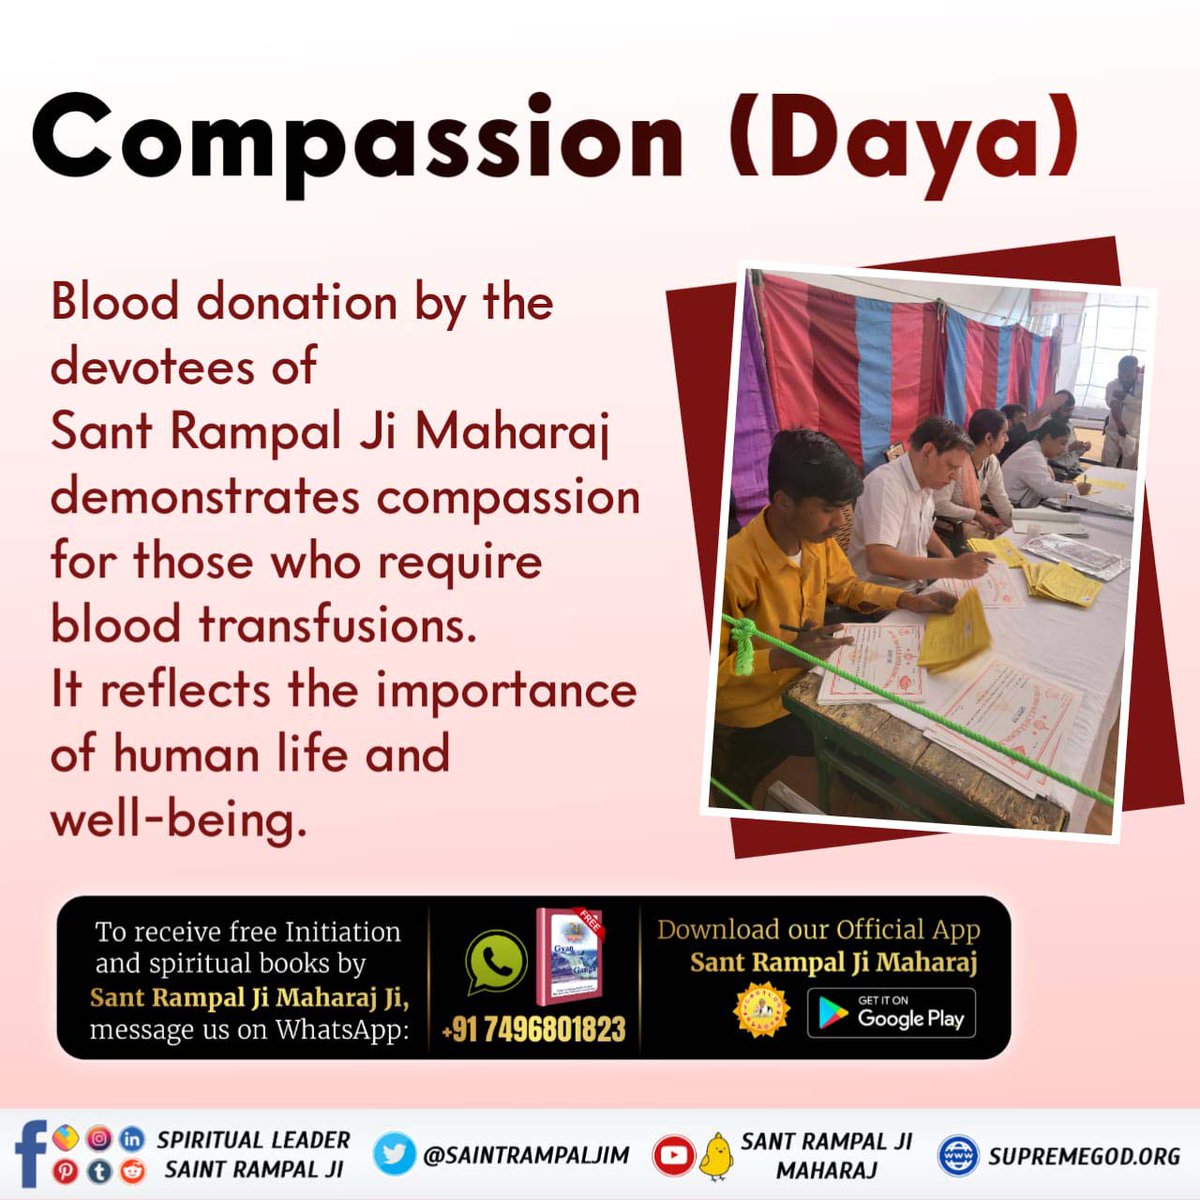 #SaveLives_DonateBlood Blood donation camps organized by the Devotees of Sant Rampal Ji Maharaj Strengthens community bonds: Organizing blood donation camps fosters a sense of unity and togetherness within the community. Followers Of Sant Rampal Ji